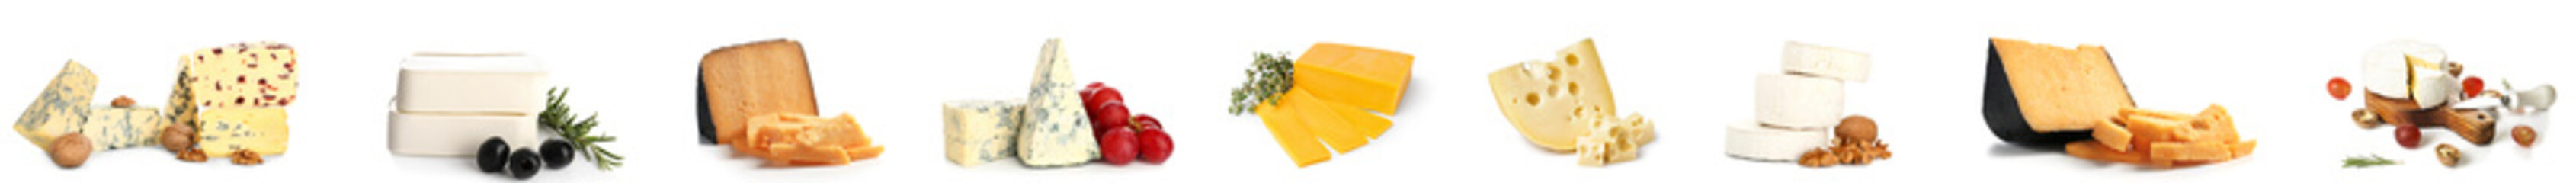 Set of tasty cheeses on white background